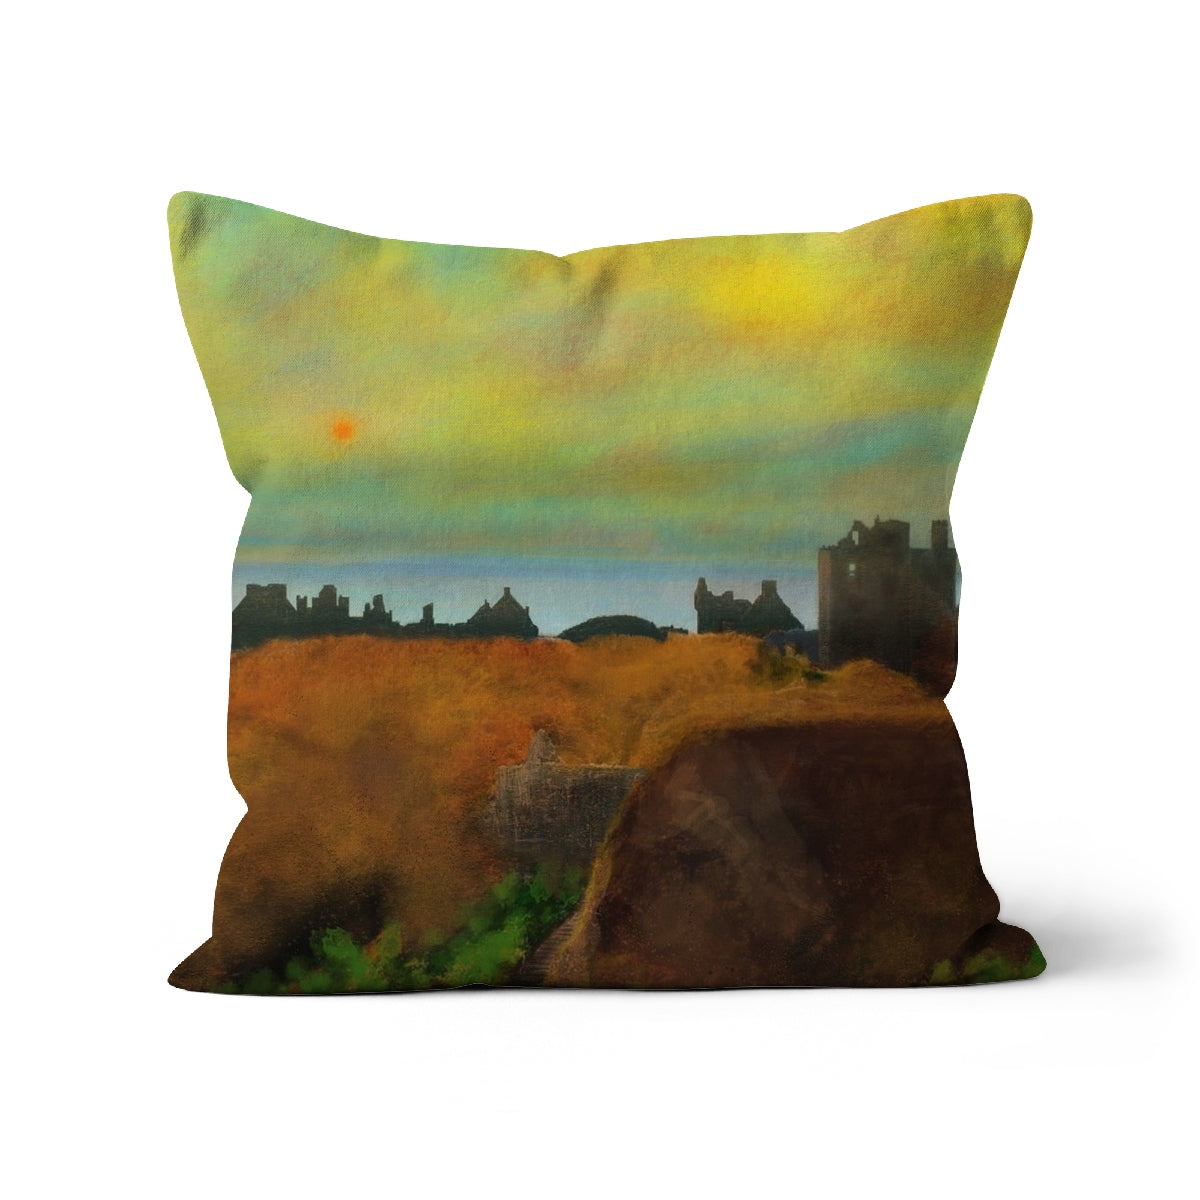 Dunnottar Castle Art Gifts Cushion-Cushions-Historic & Iconic Scotland Art Gallery-Linen-22"x22"-Paintings, Prints, Homeware, Art Gifts From Scotland By Scottish Artist Kevin Hunter